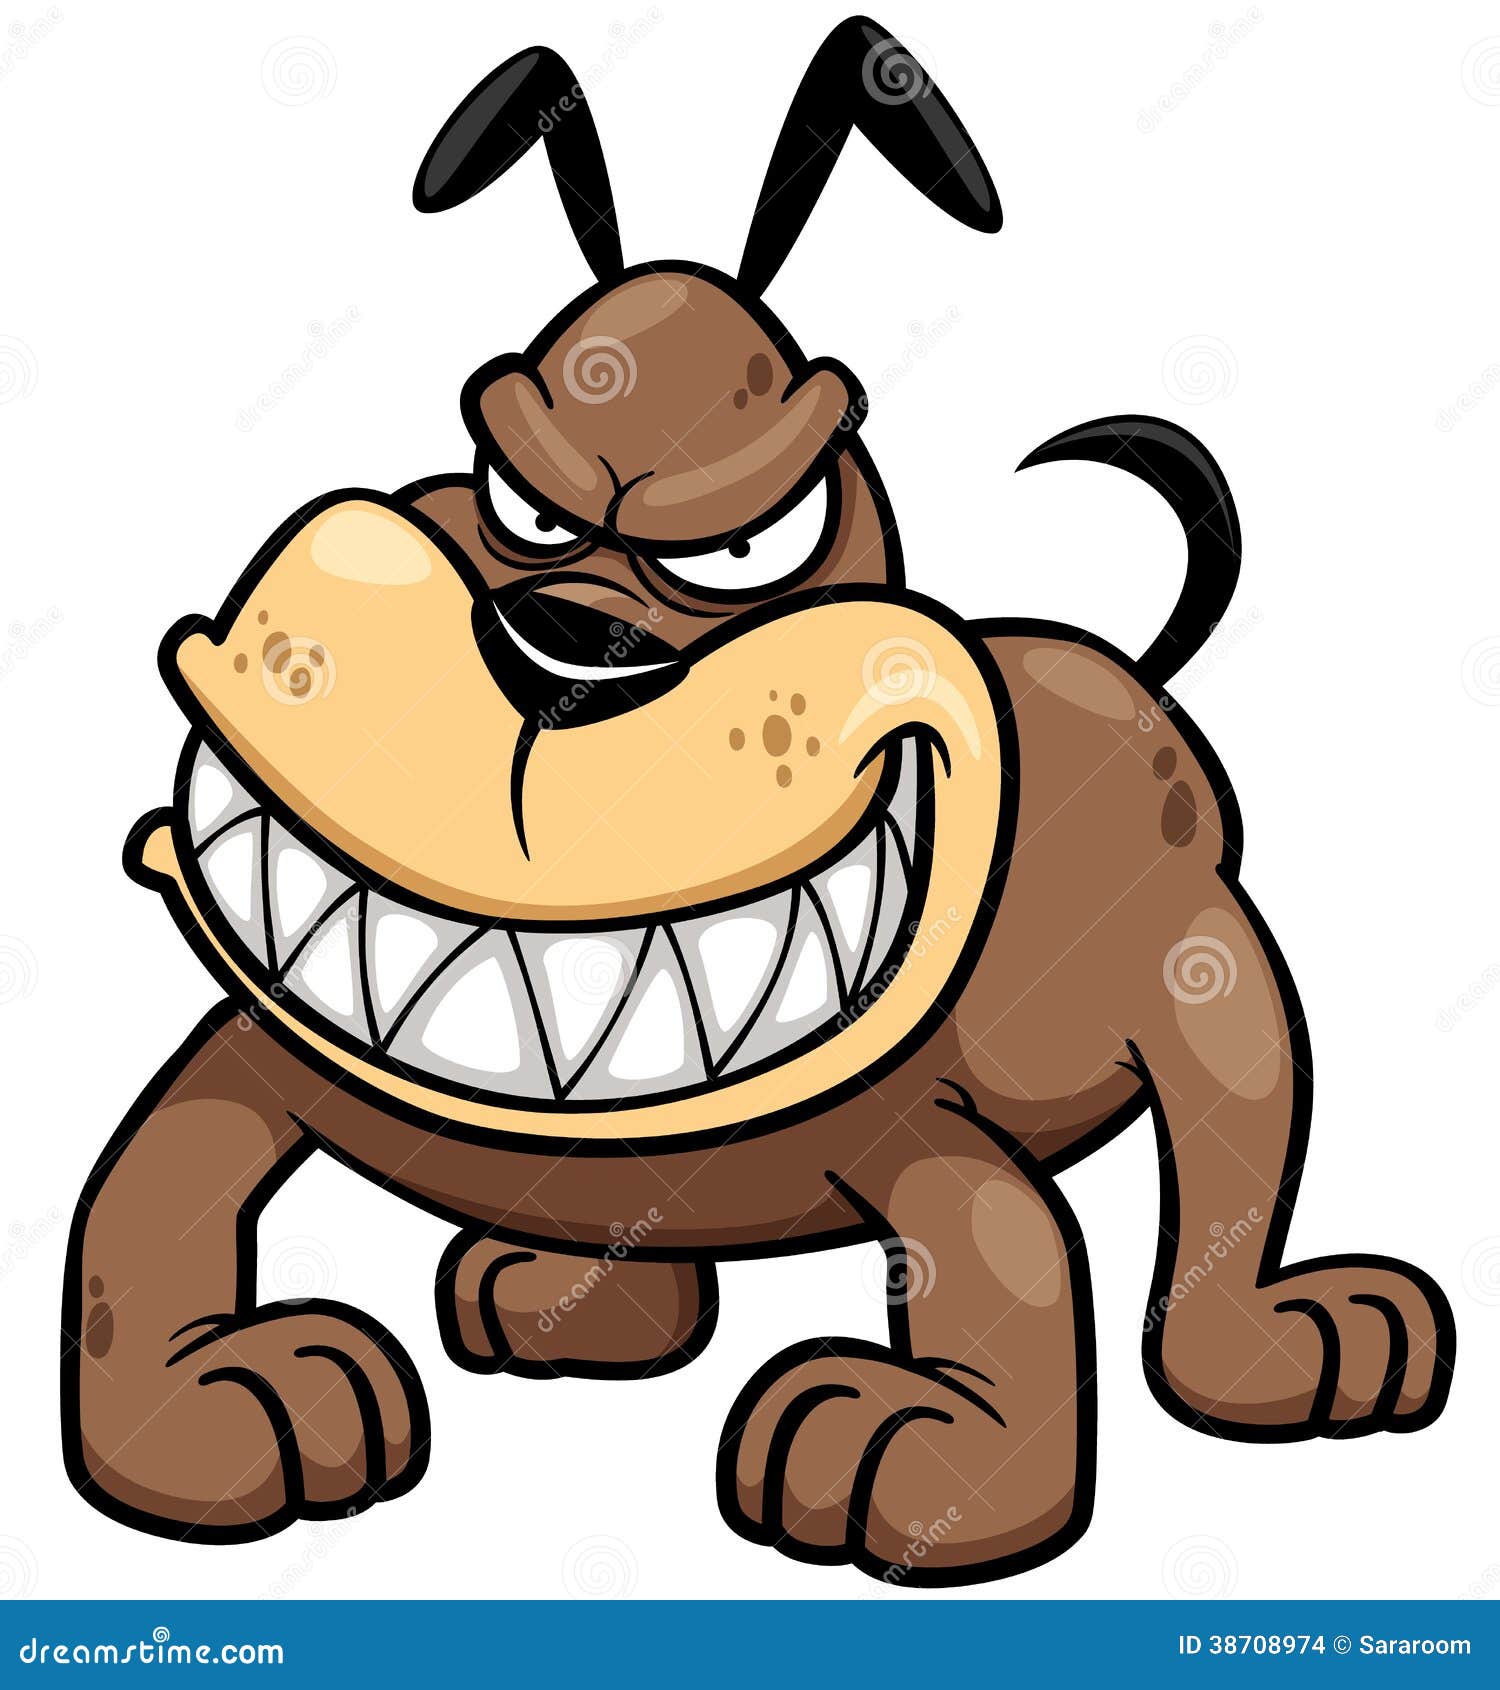 Angry Dog Stock Images - Image: 38708974